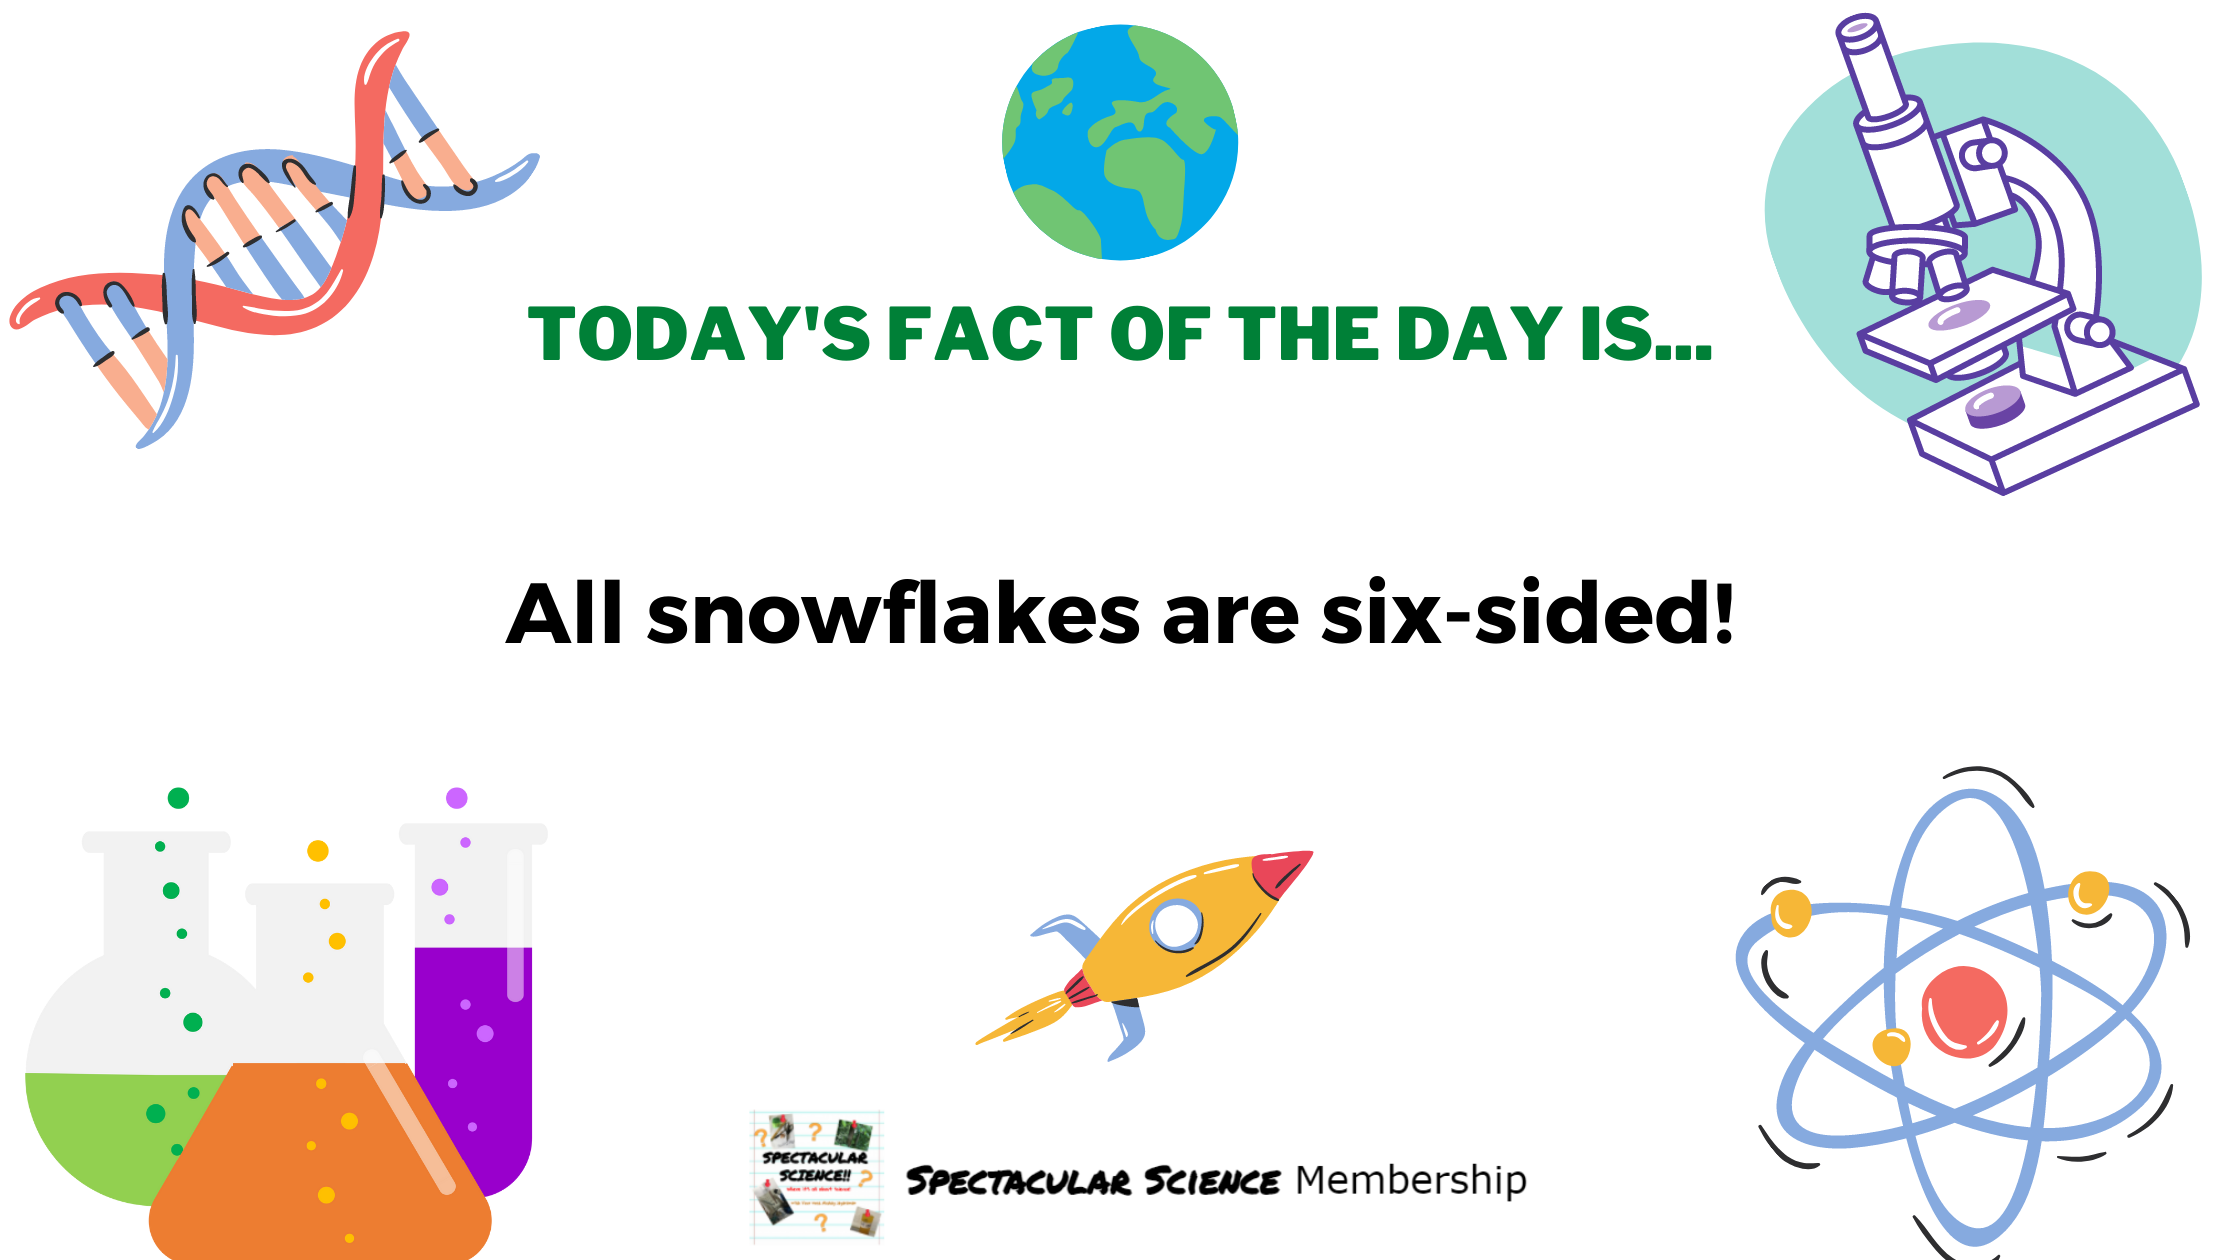 Fact of the Day Image Jan. 17th